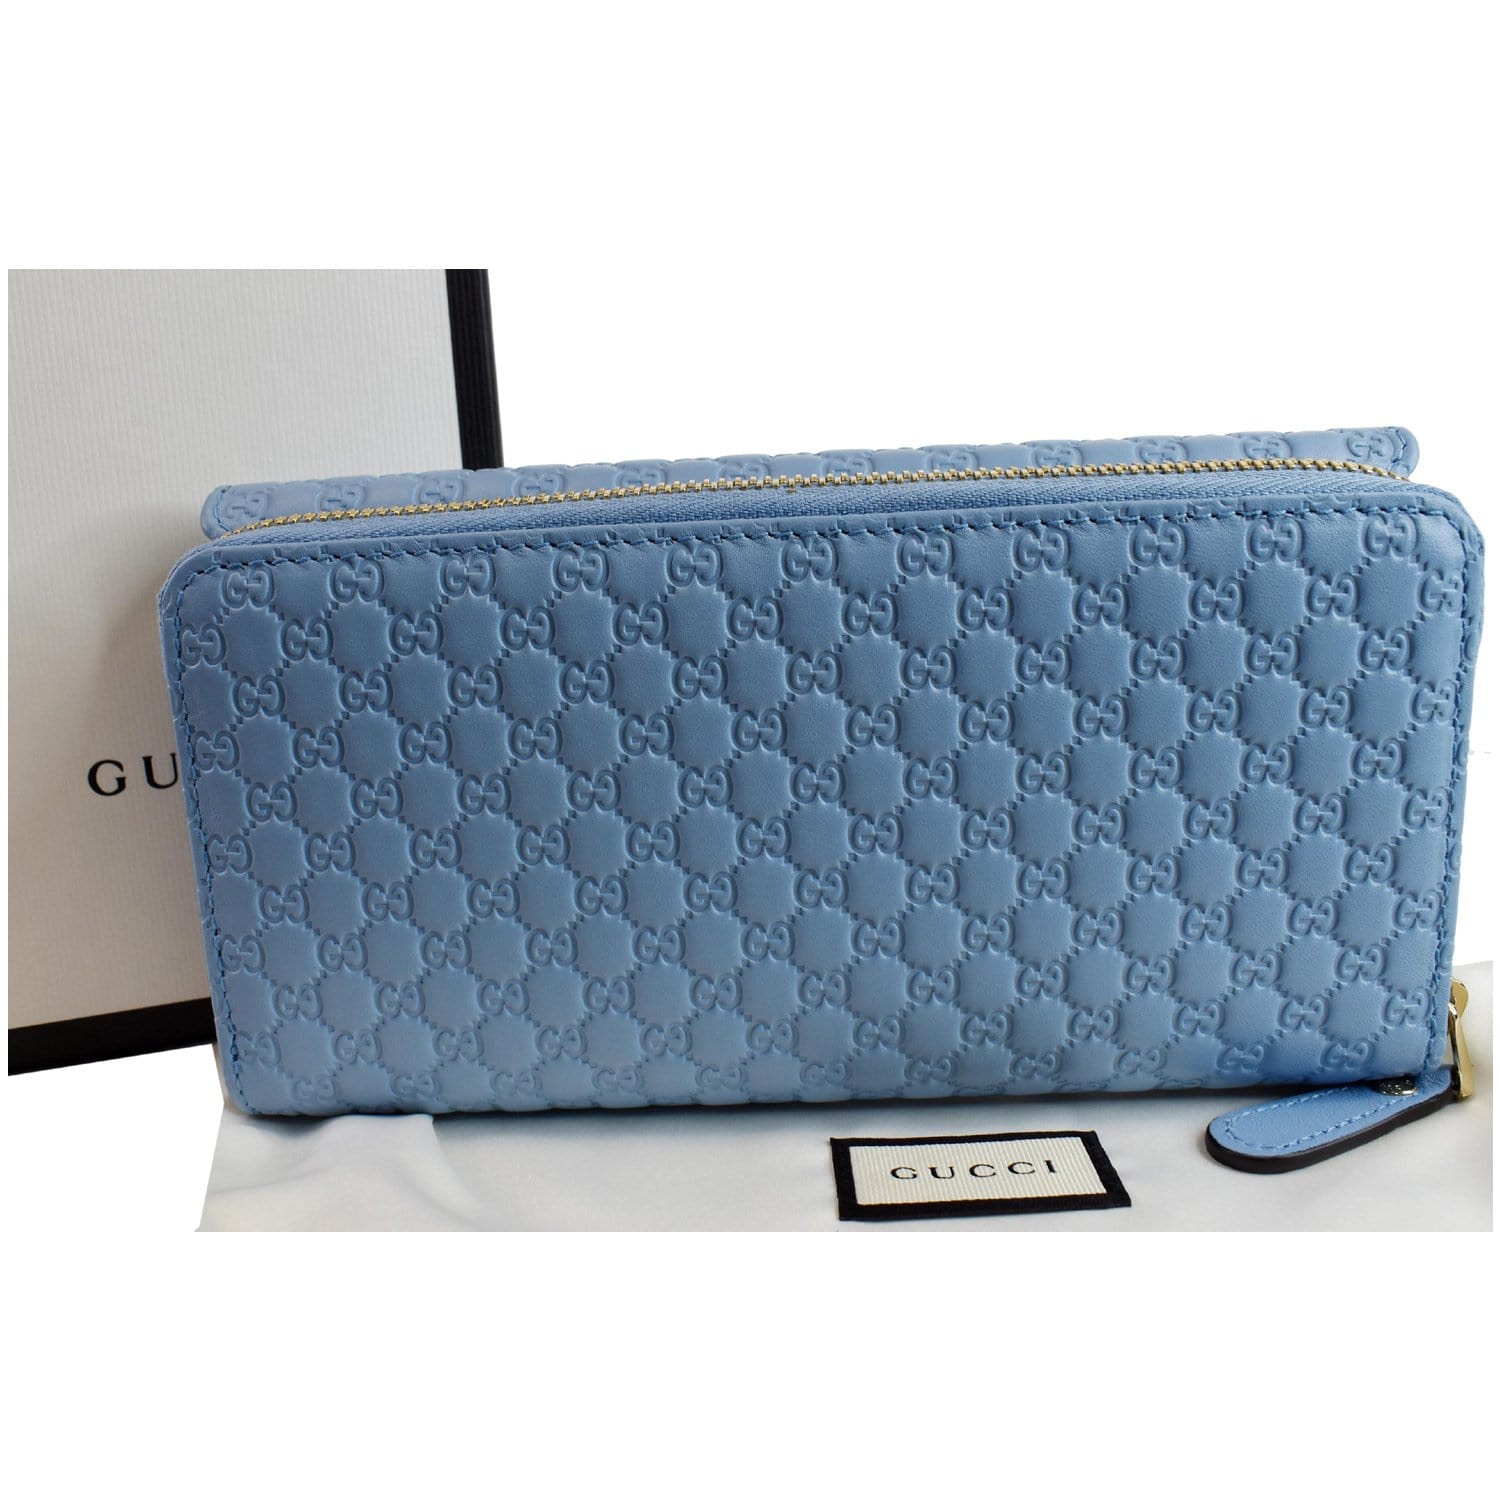 Burberry Women's Dusty Teal Blue Textured Leather Wallet